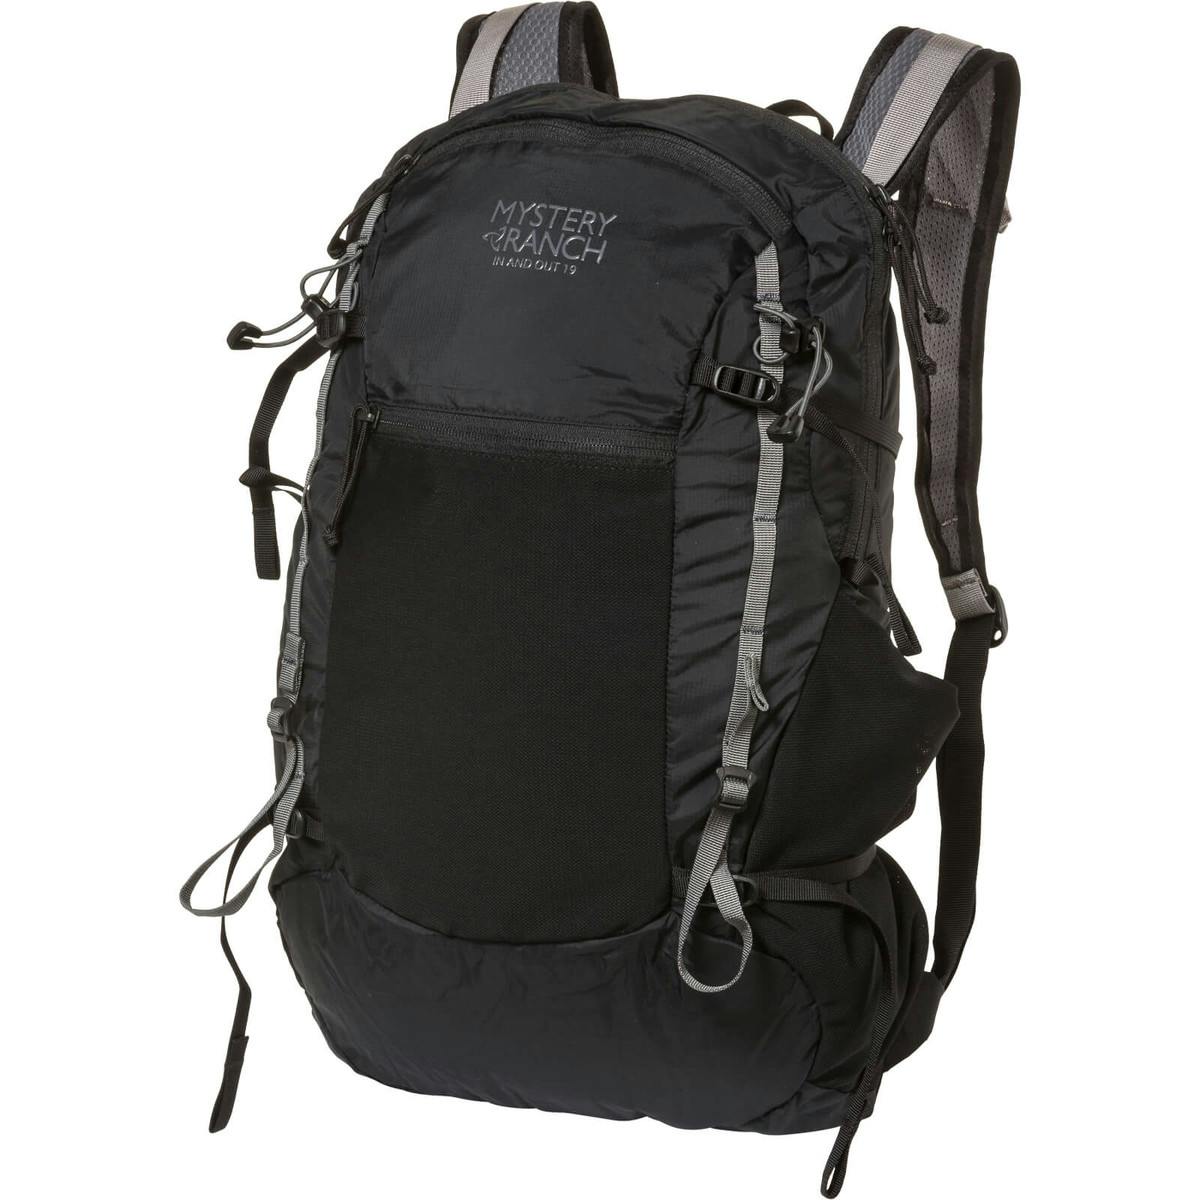 Mystery Ranch In And Out 19 Backpack